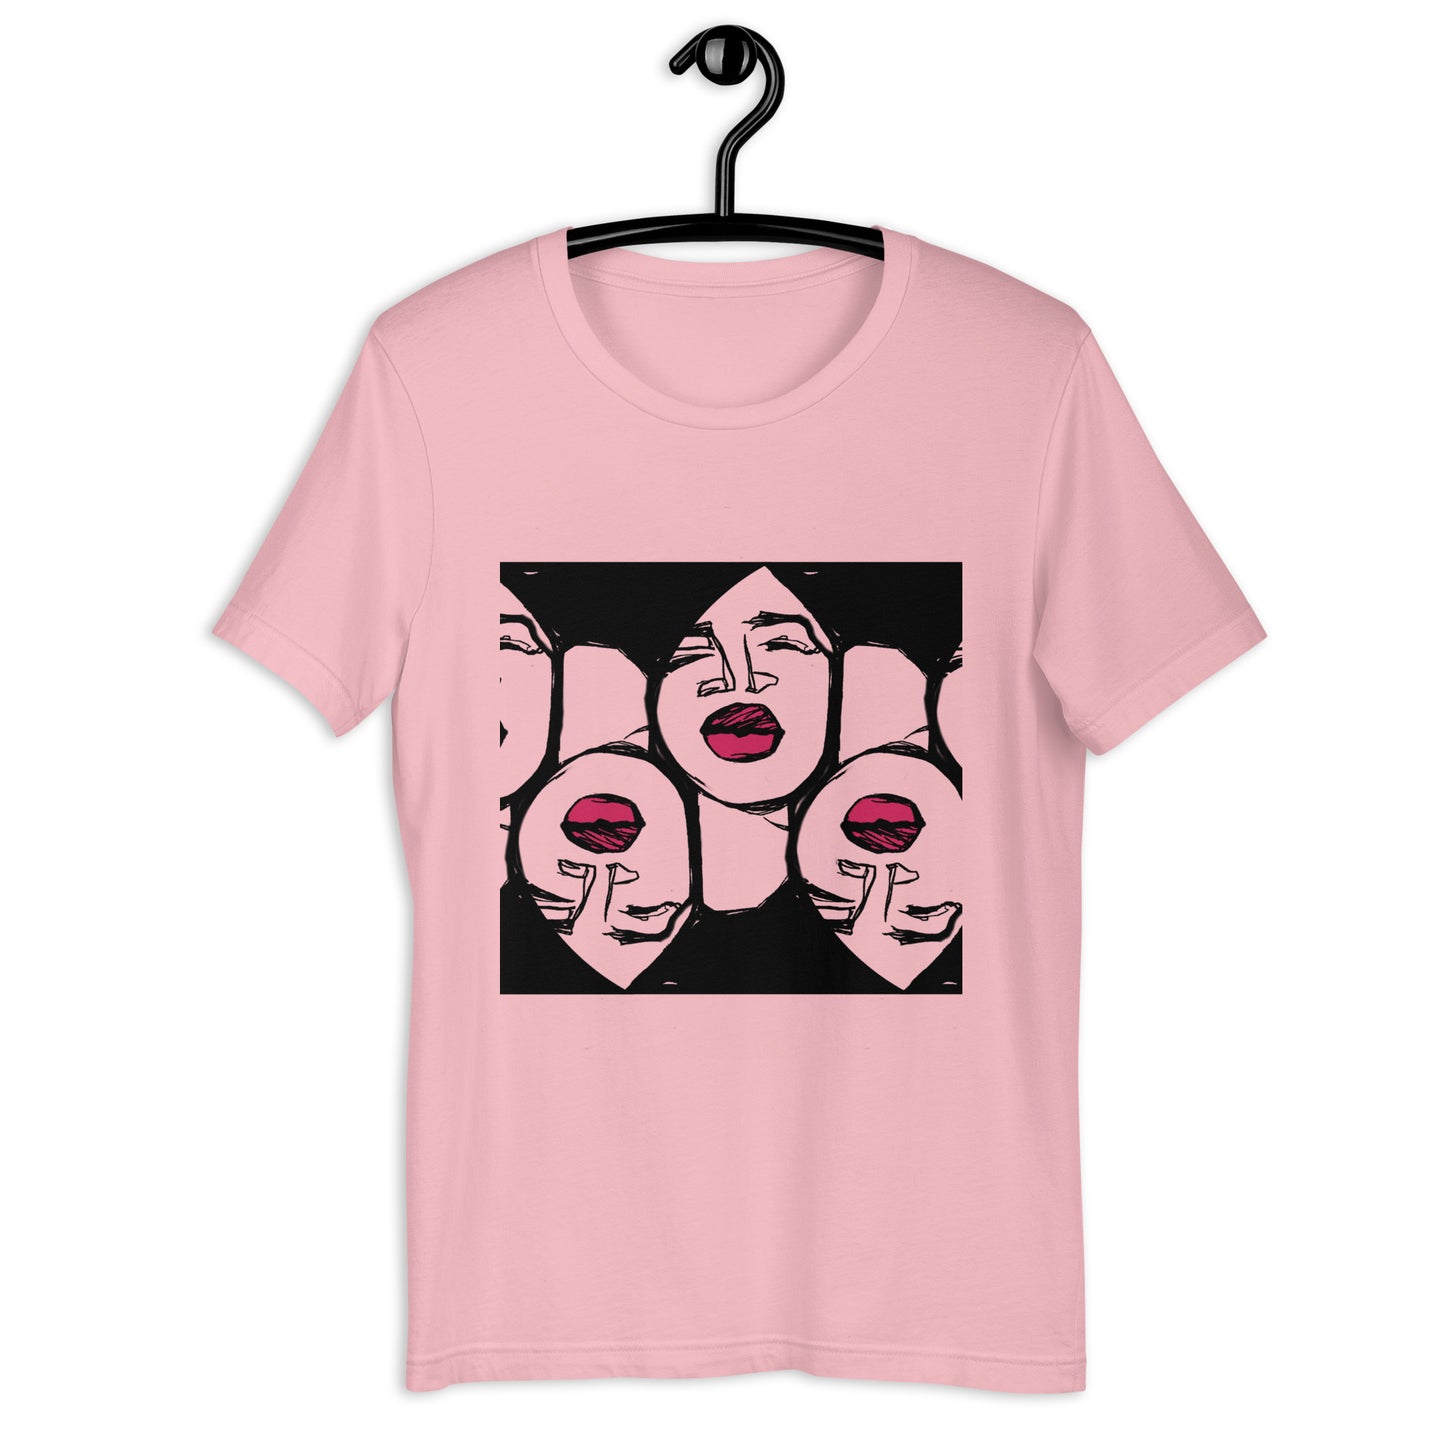 Lips (Two) Adult T-shirt